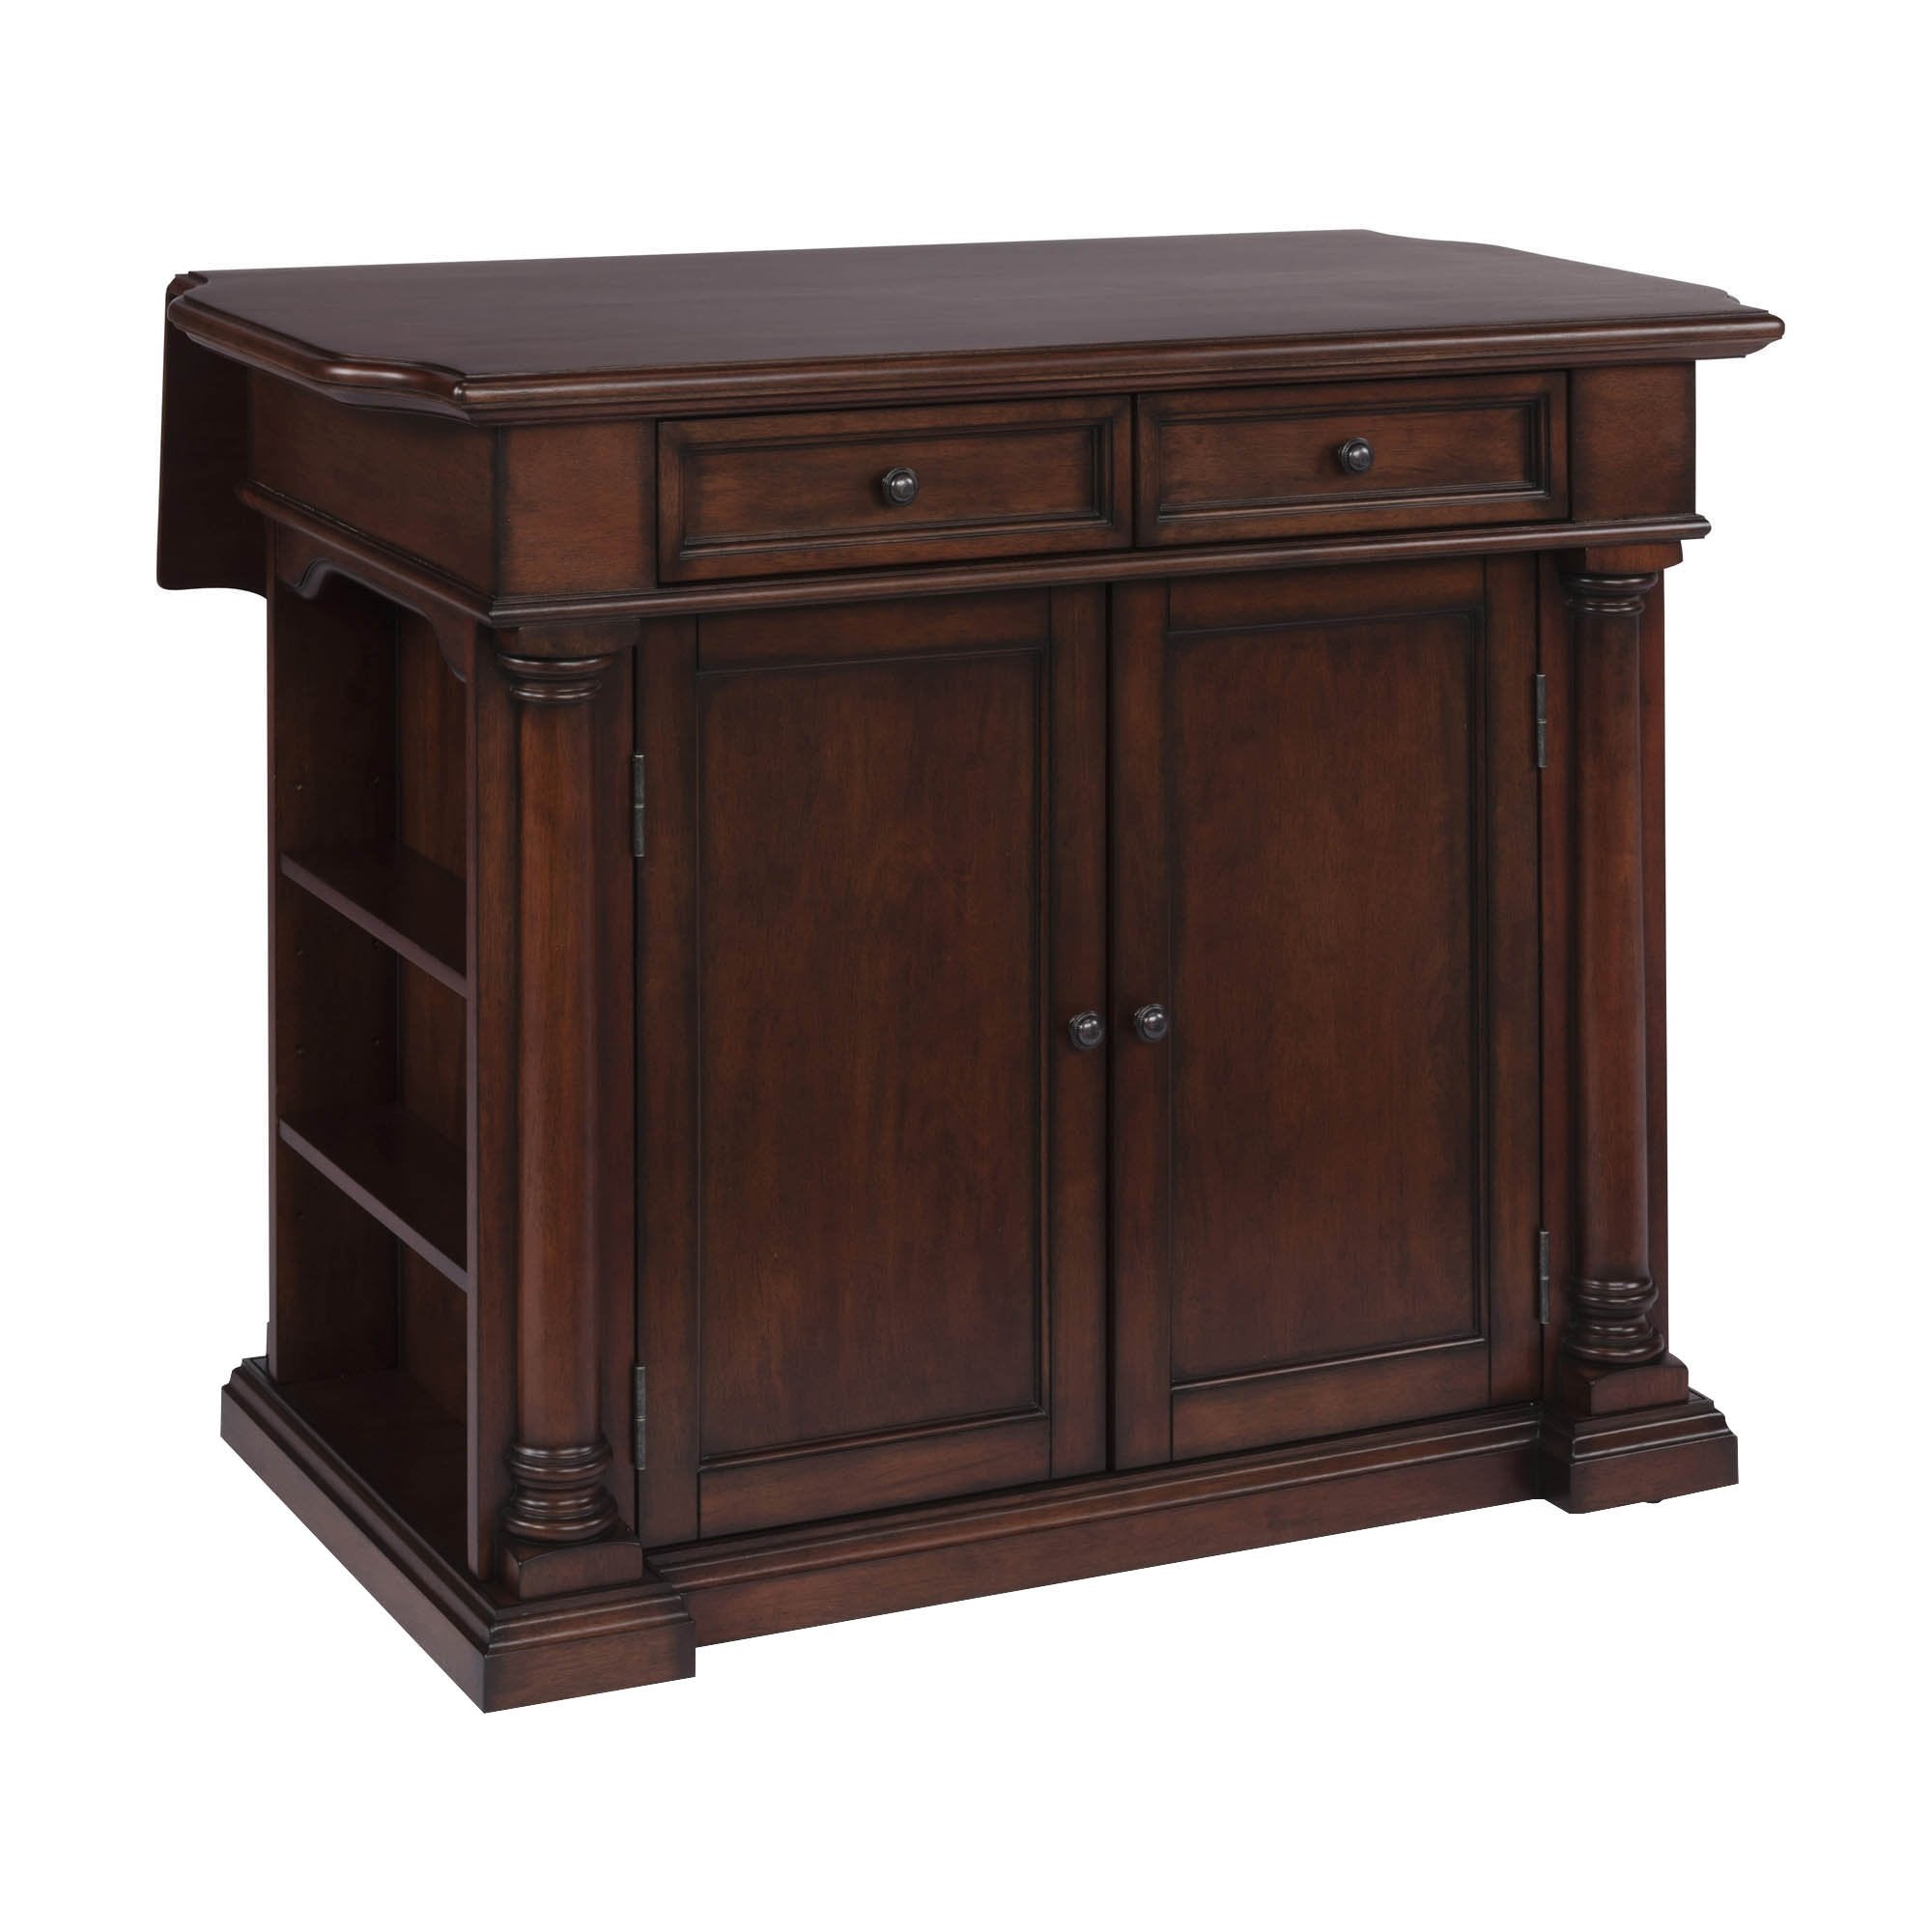 homestyles-beacon-hill-classic-solid-wood-cherry